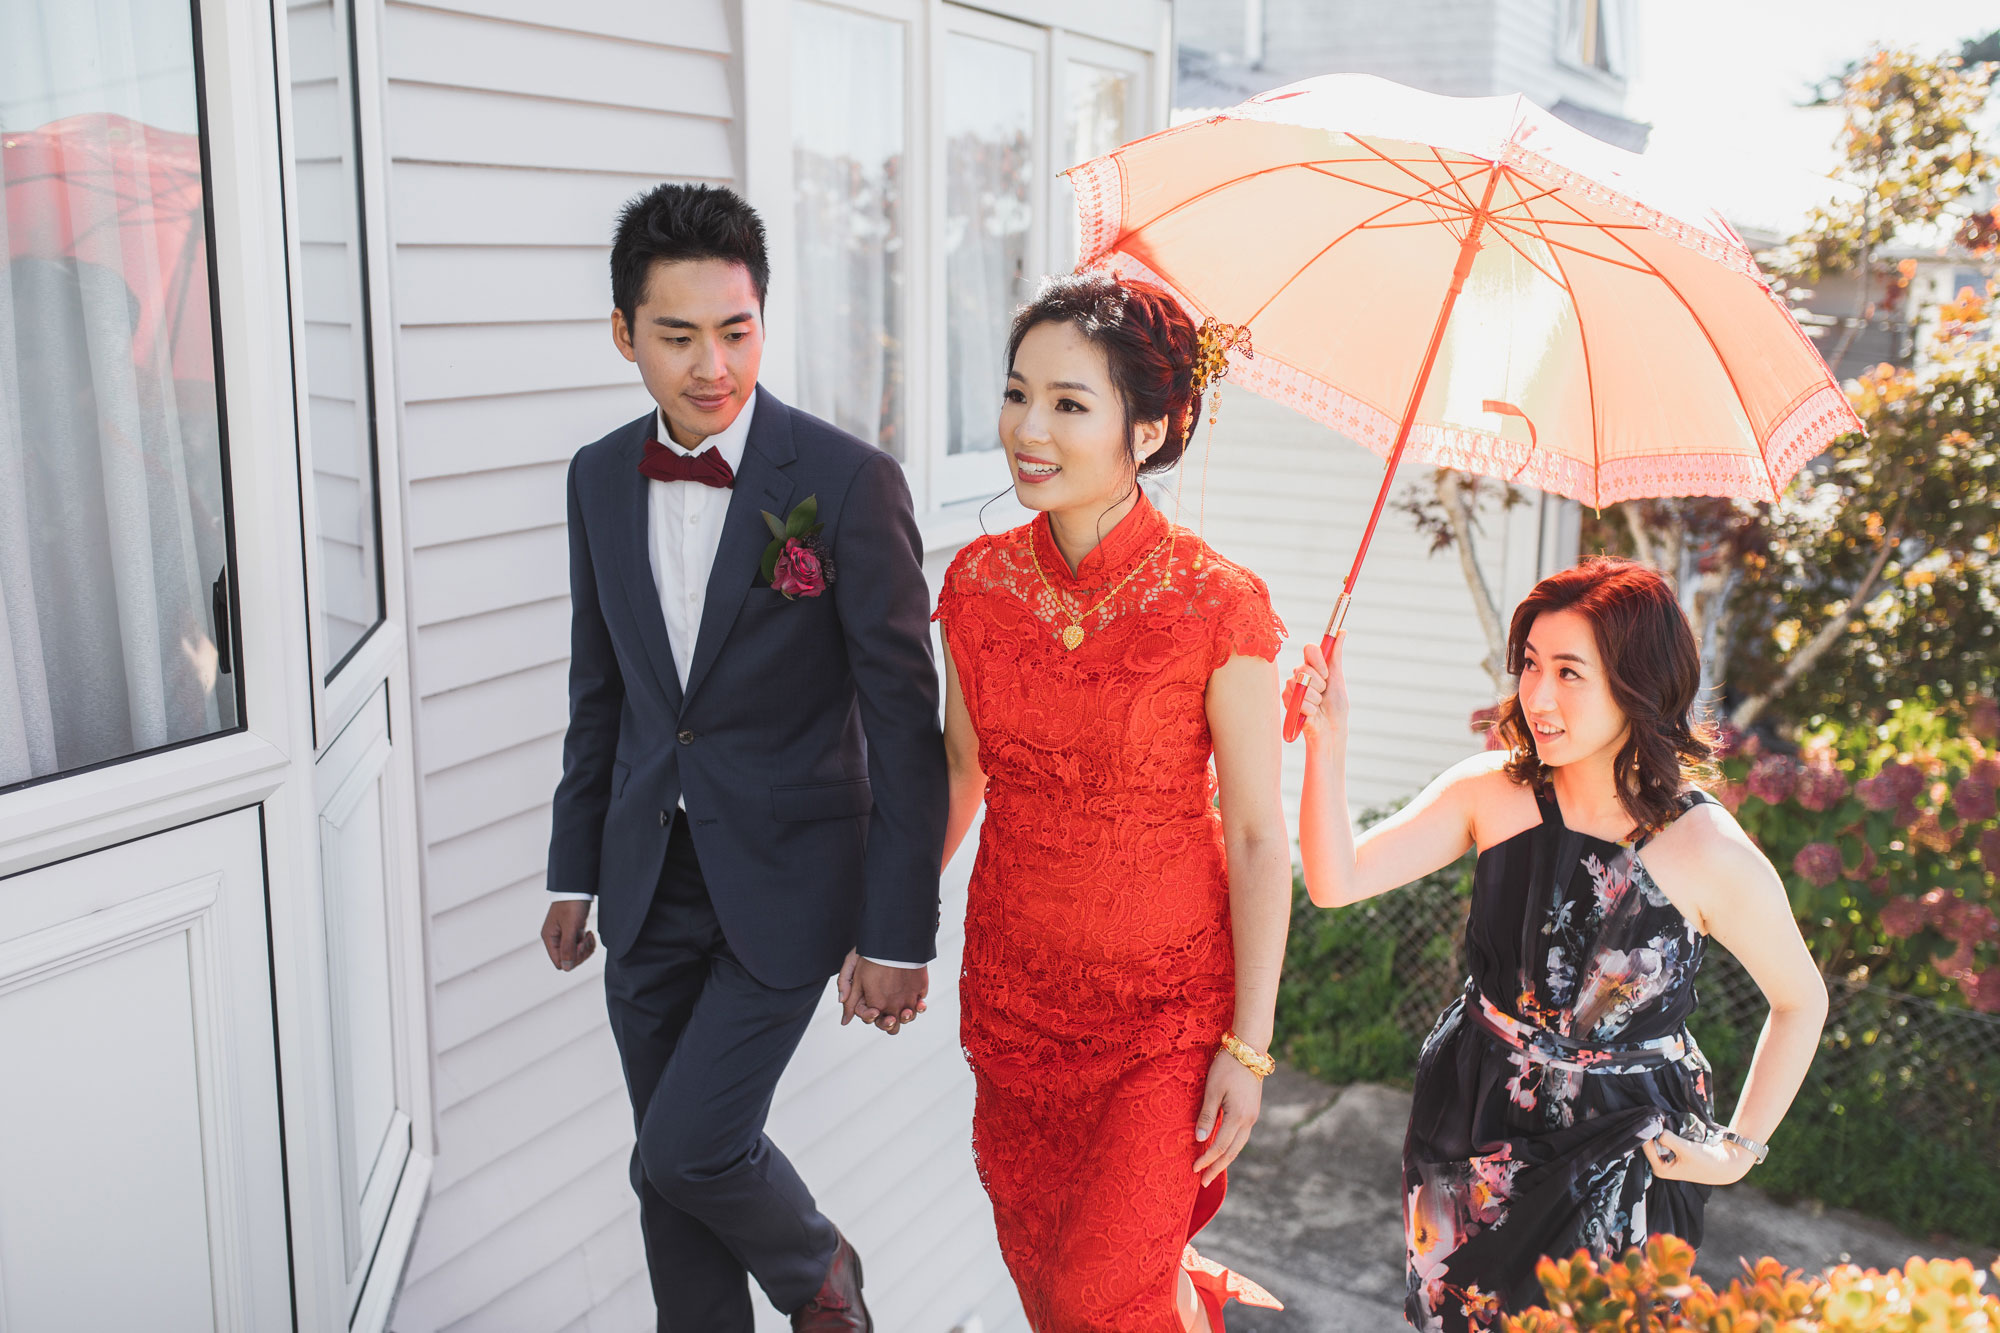 auckland chinese wedding bride visiting groom family